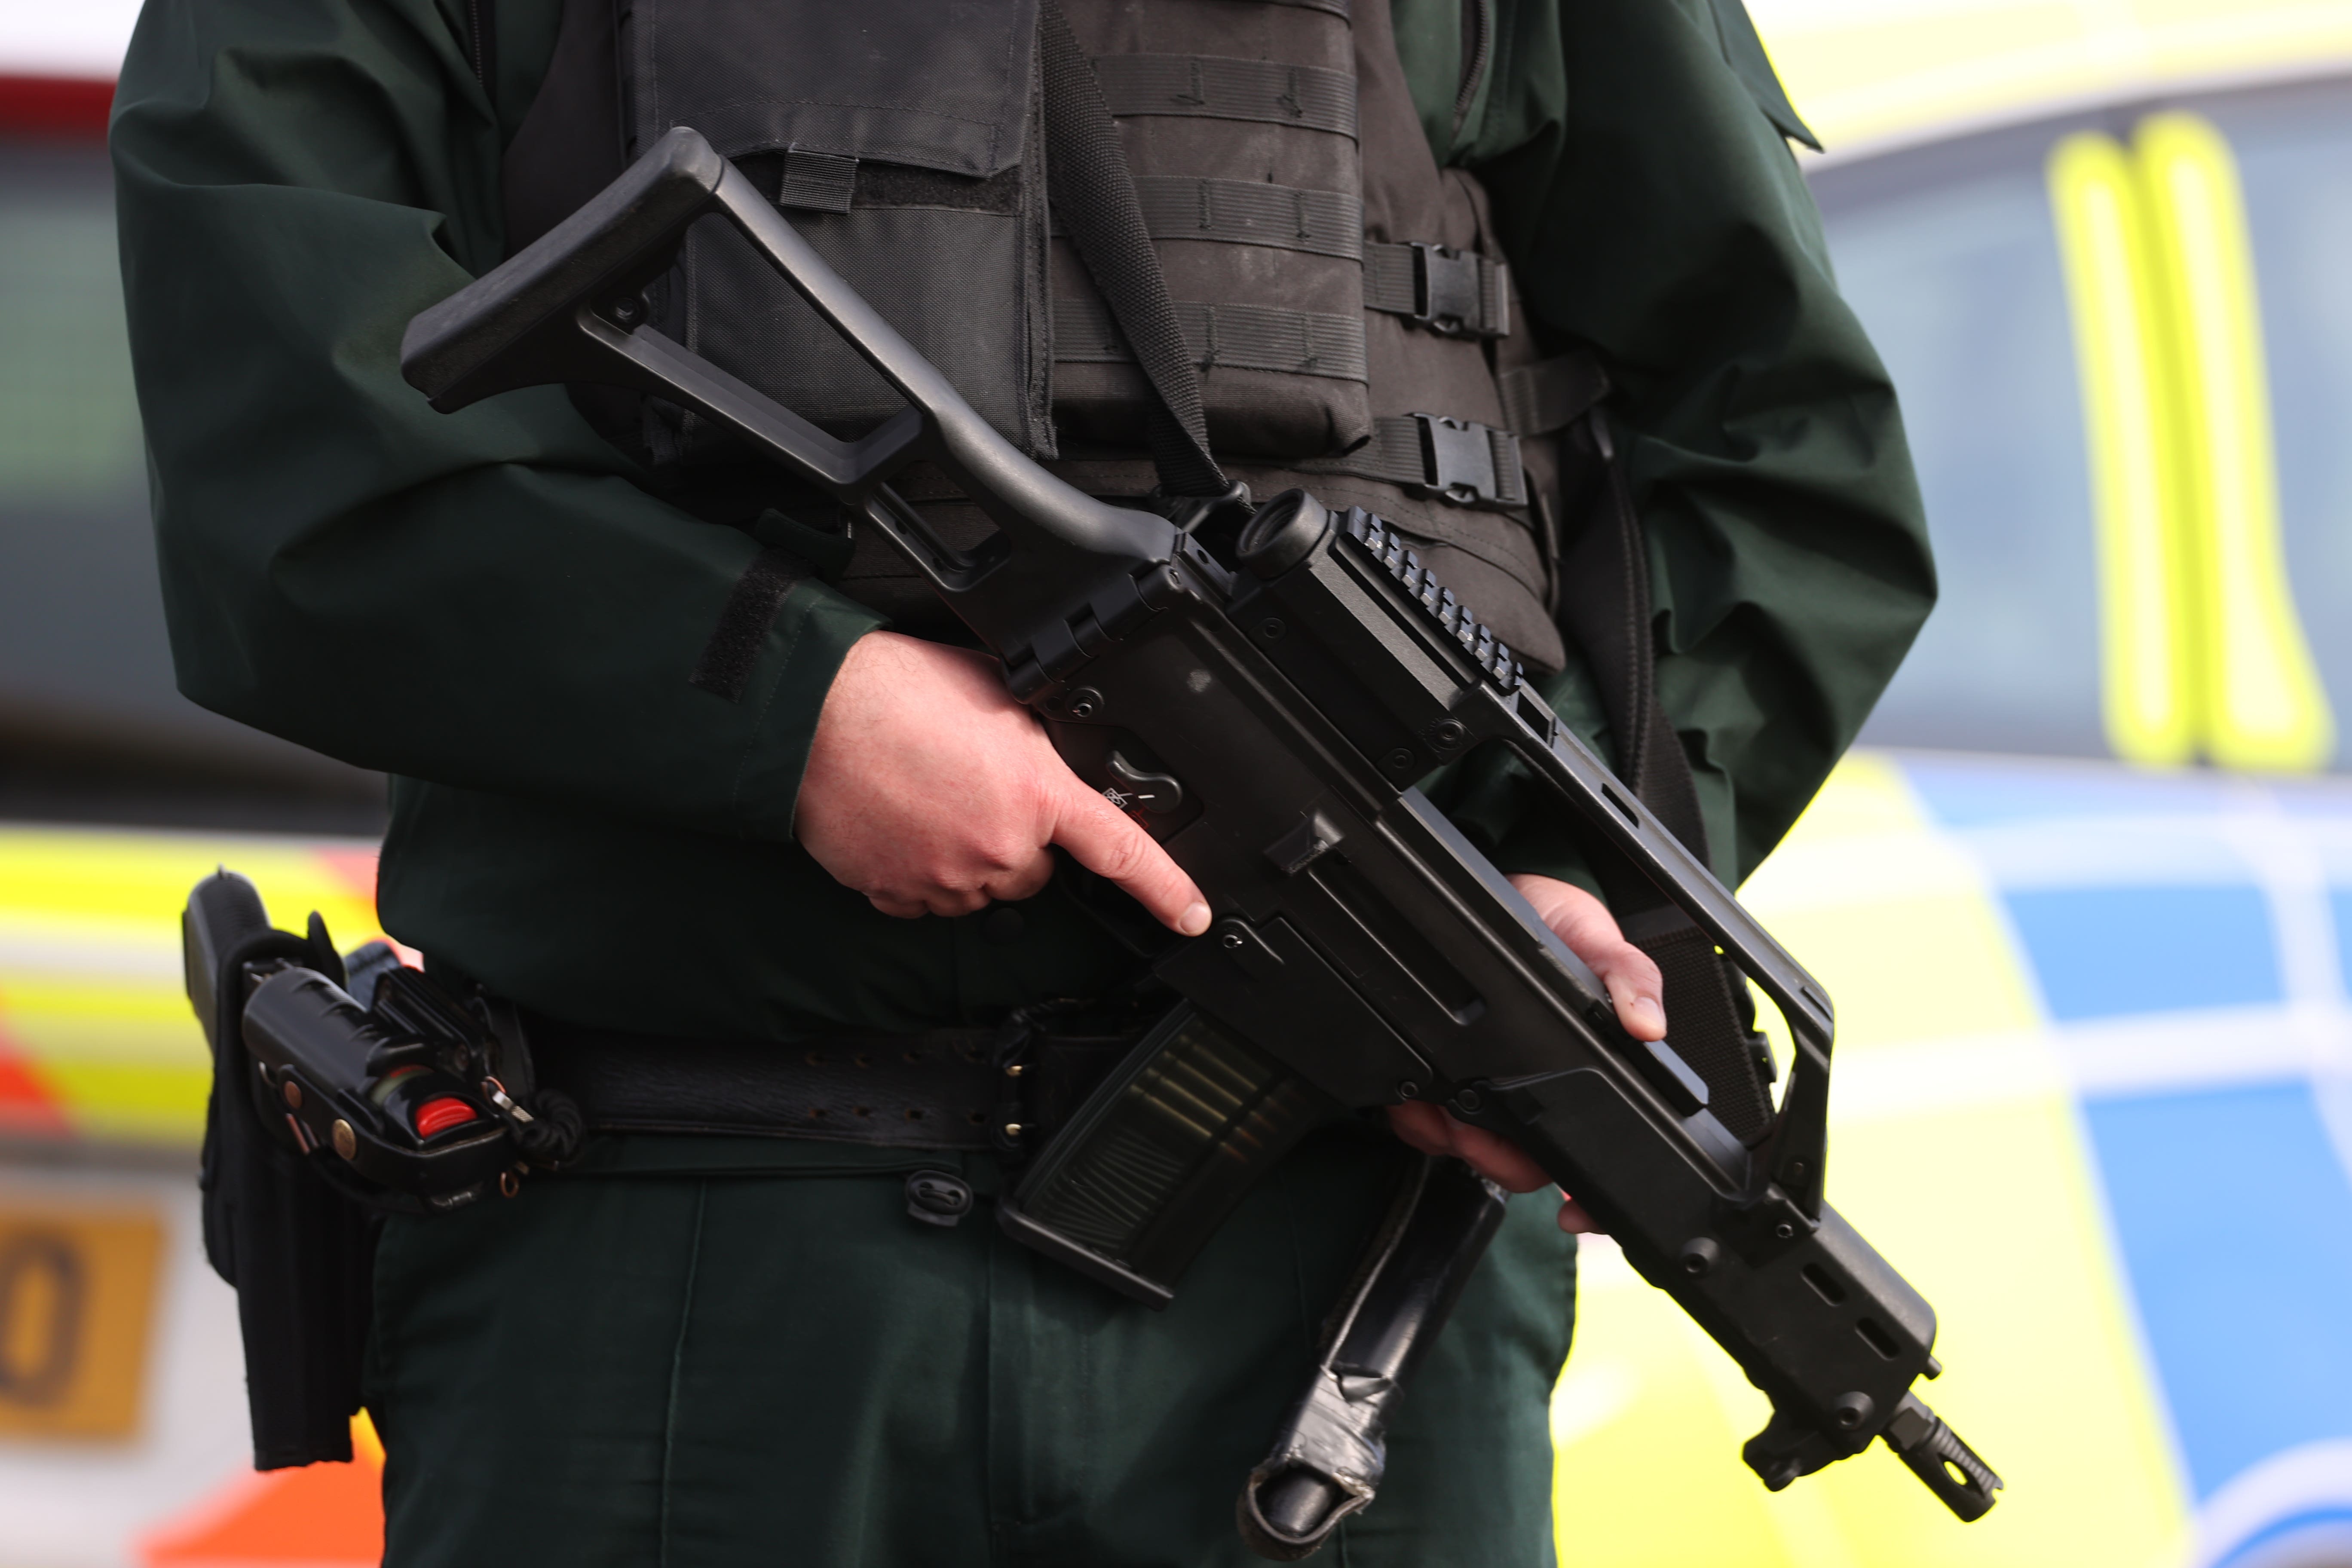 Rishi Sunak has backed a Home Office review into guidelines for firearms officers